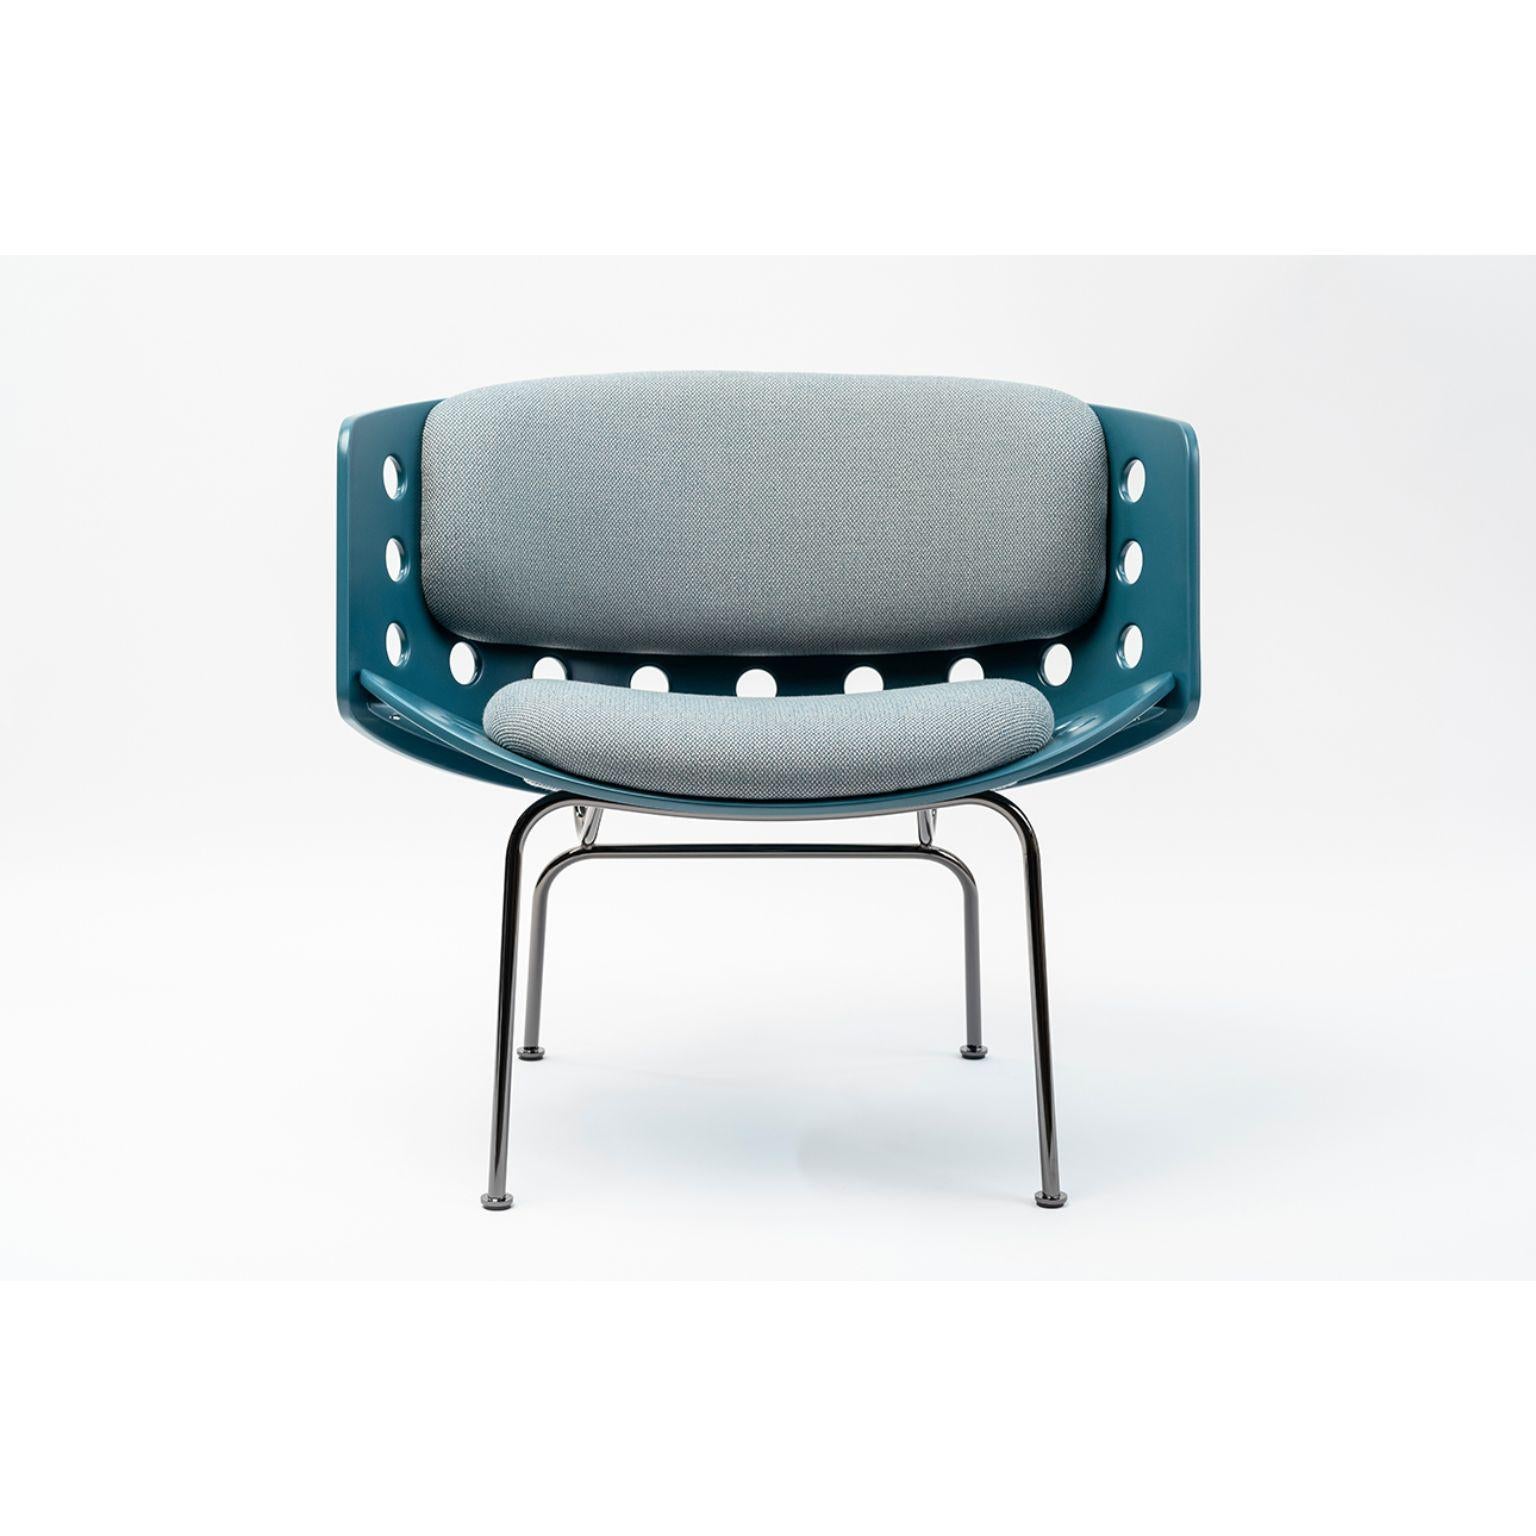 Melitea lounge chair by Luca Nichetto
Materials: shell: dark green / dark yellow / duck Blue
/warm light grey lacquered polyurethane.
 Upholstery: fabric or leather.
 Structure: black powder-coated metal, black chrome metal or zinc.
 